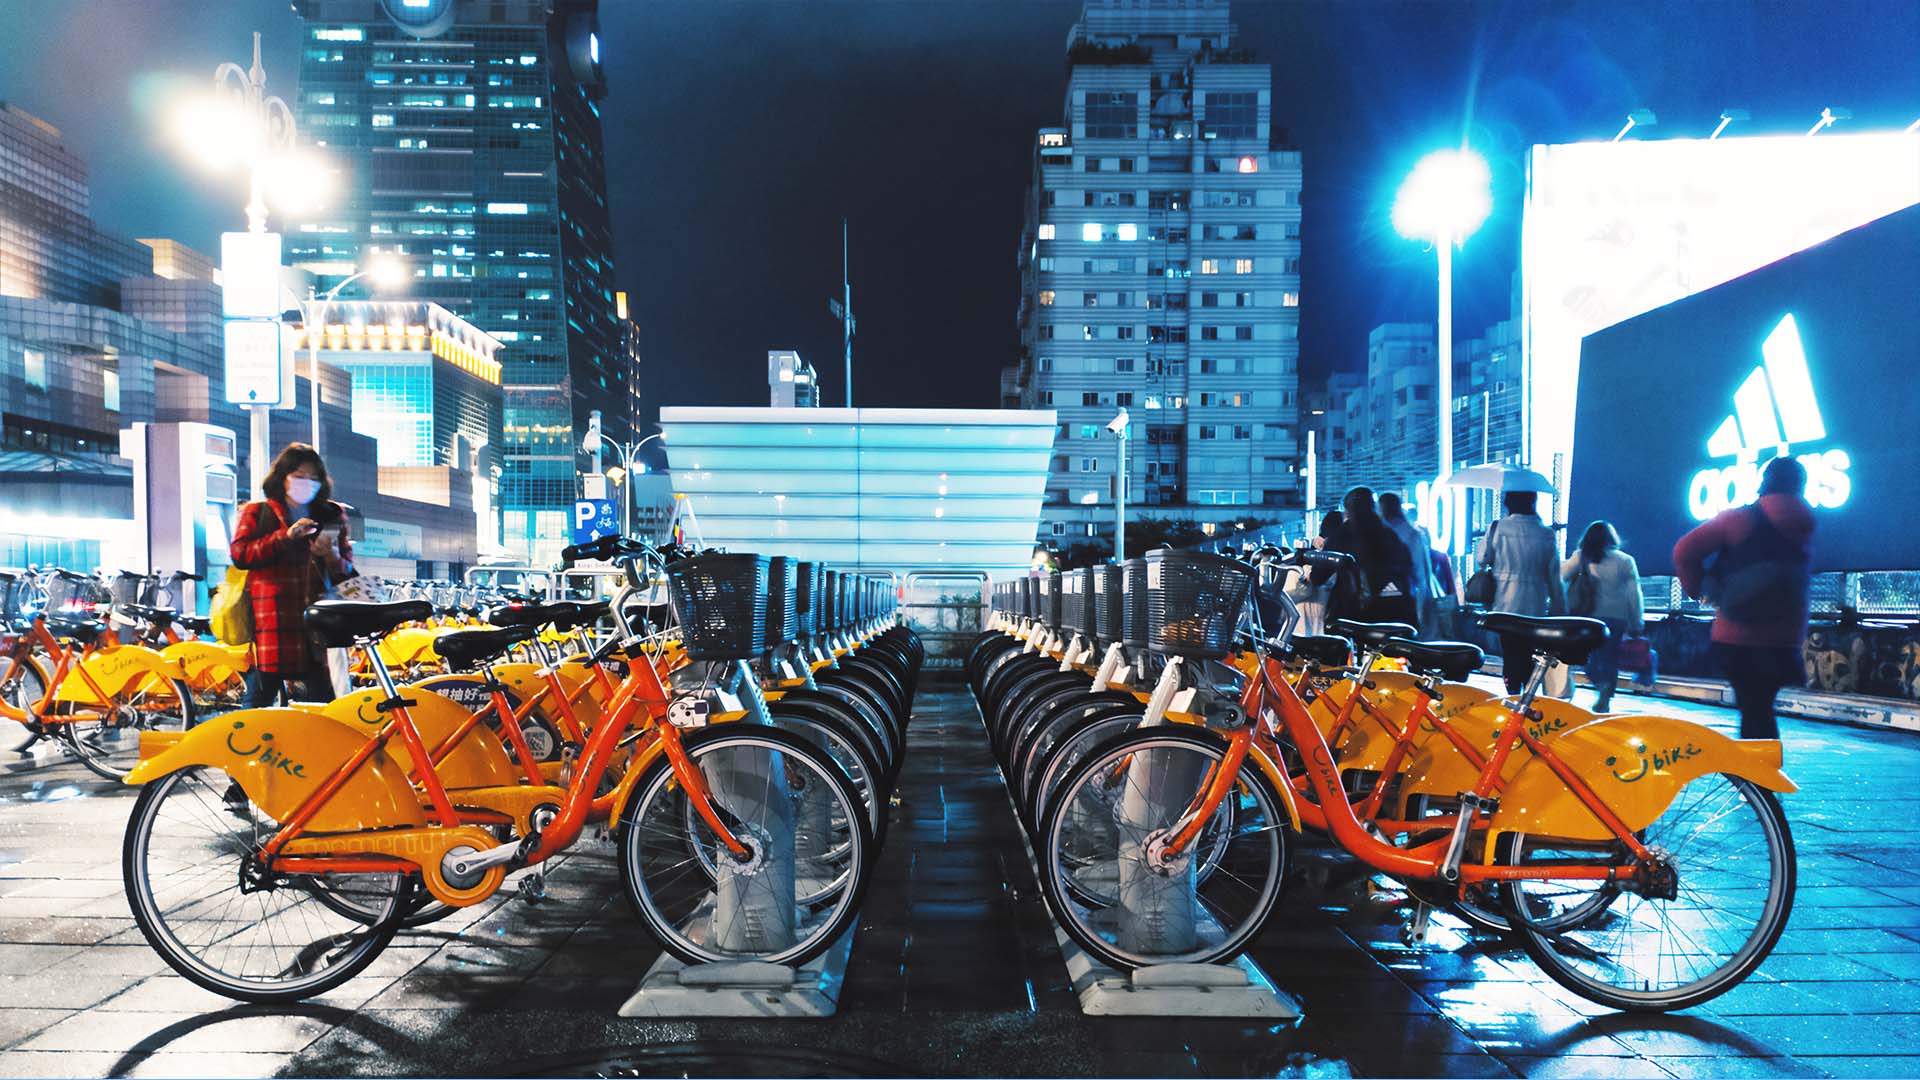 Carless cities create a new transportation system, including bikes like these